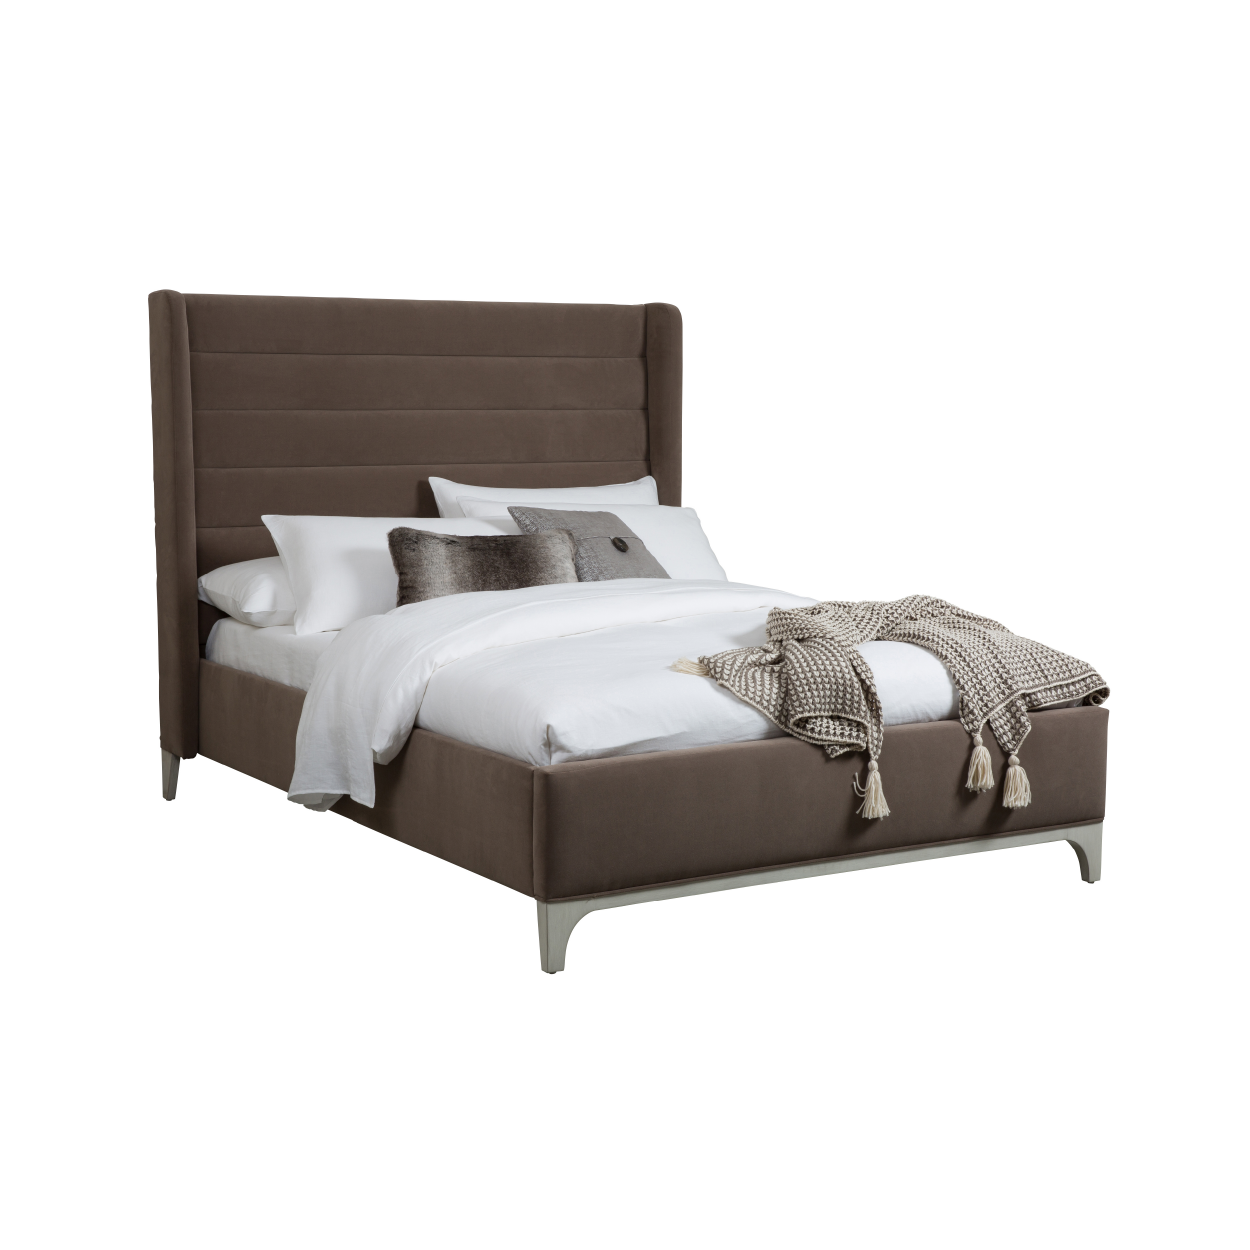 Lyric Bed Low Profile Footboard King Size